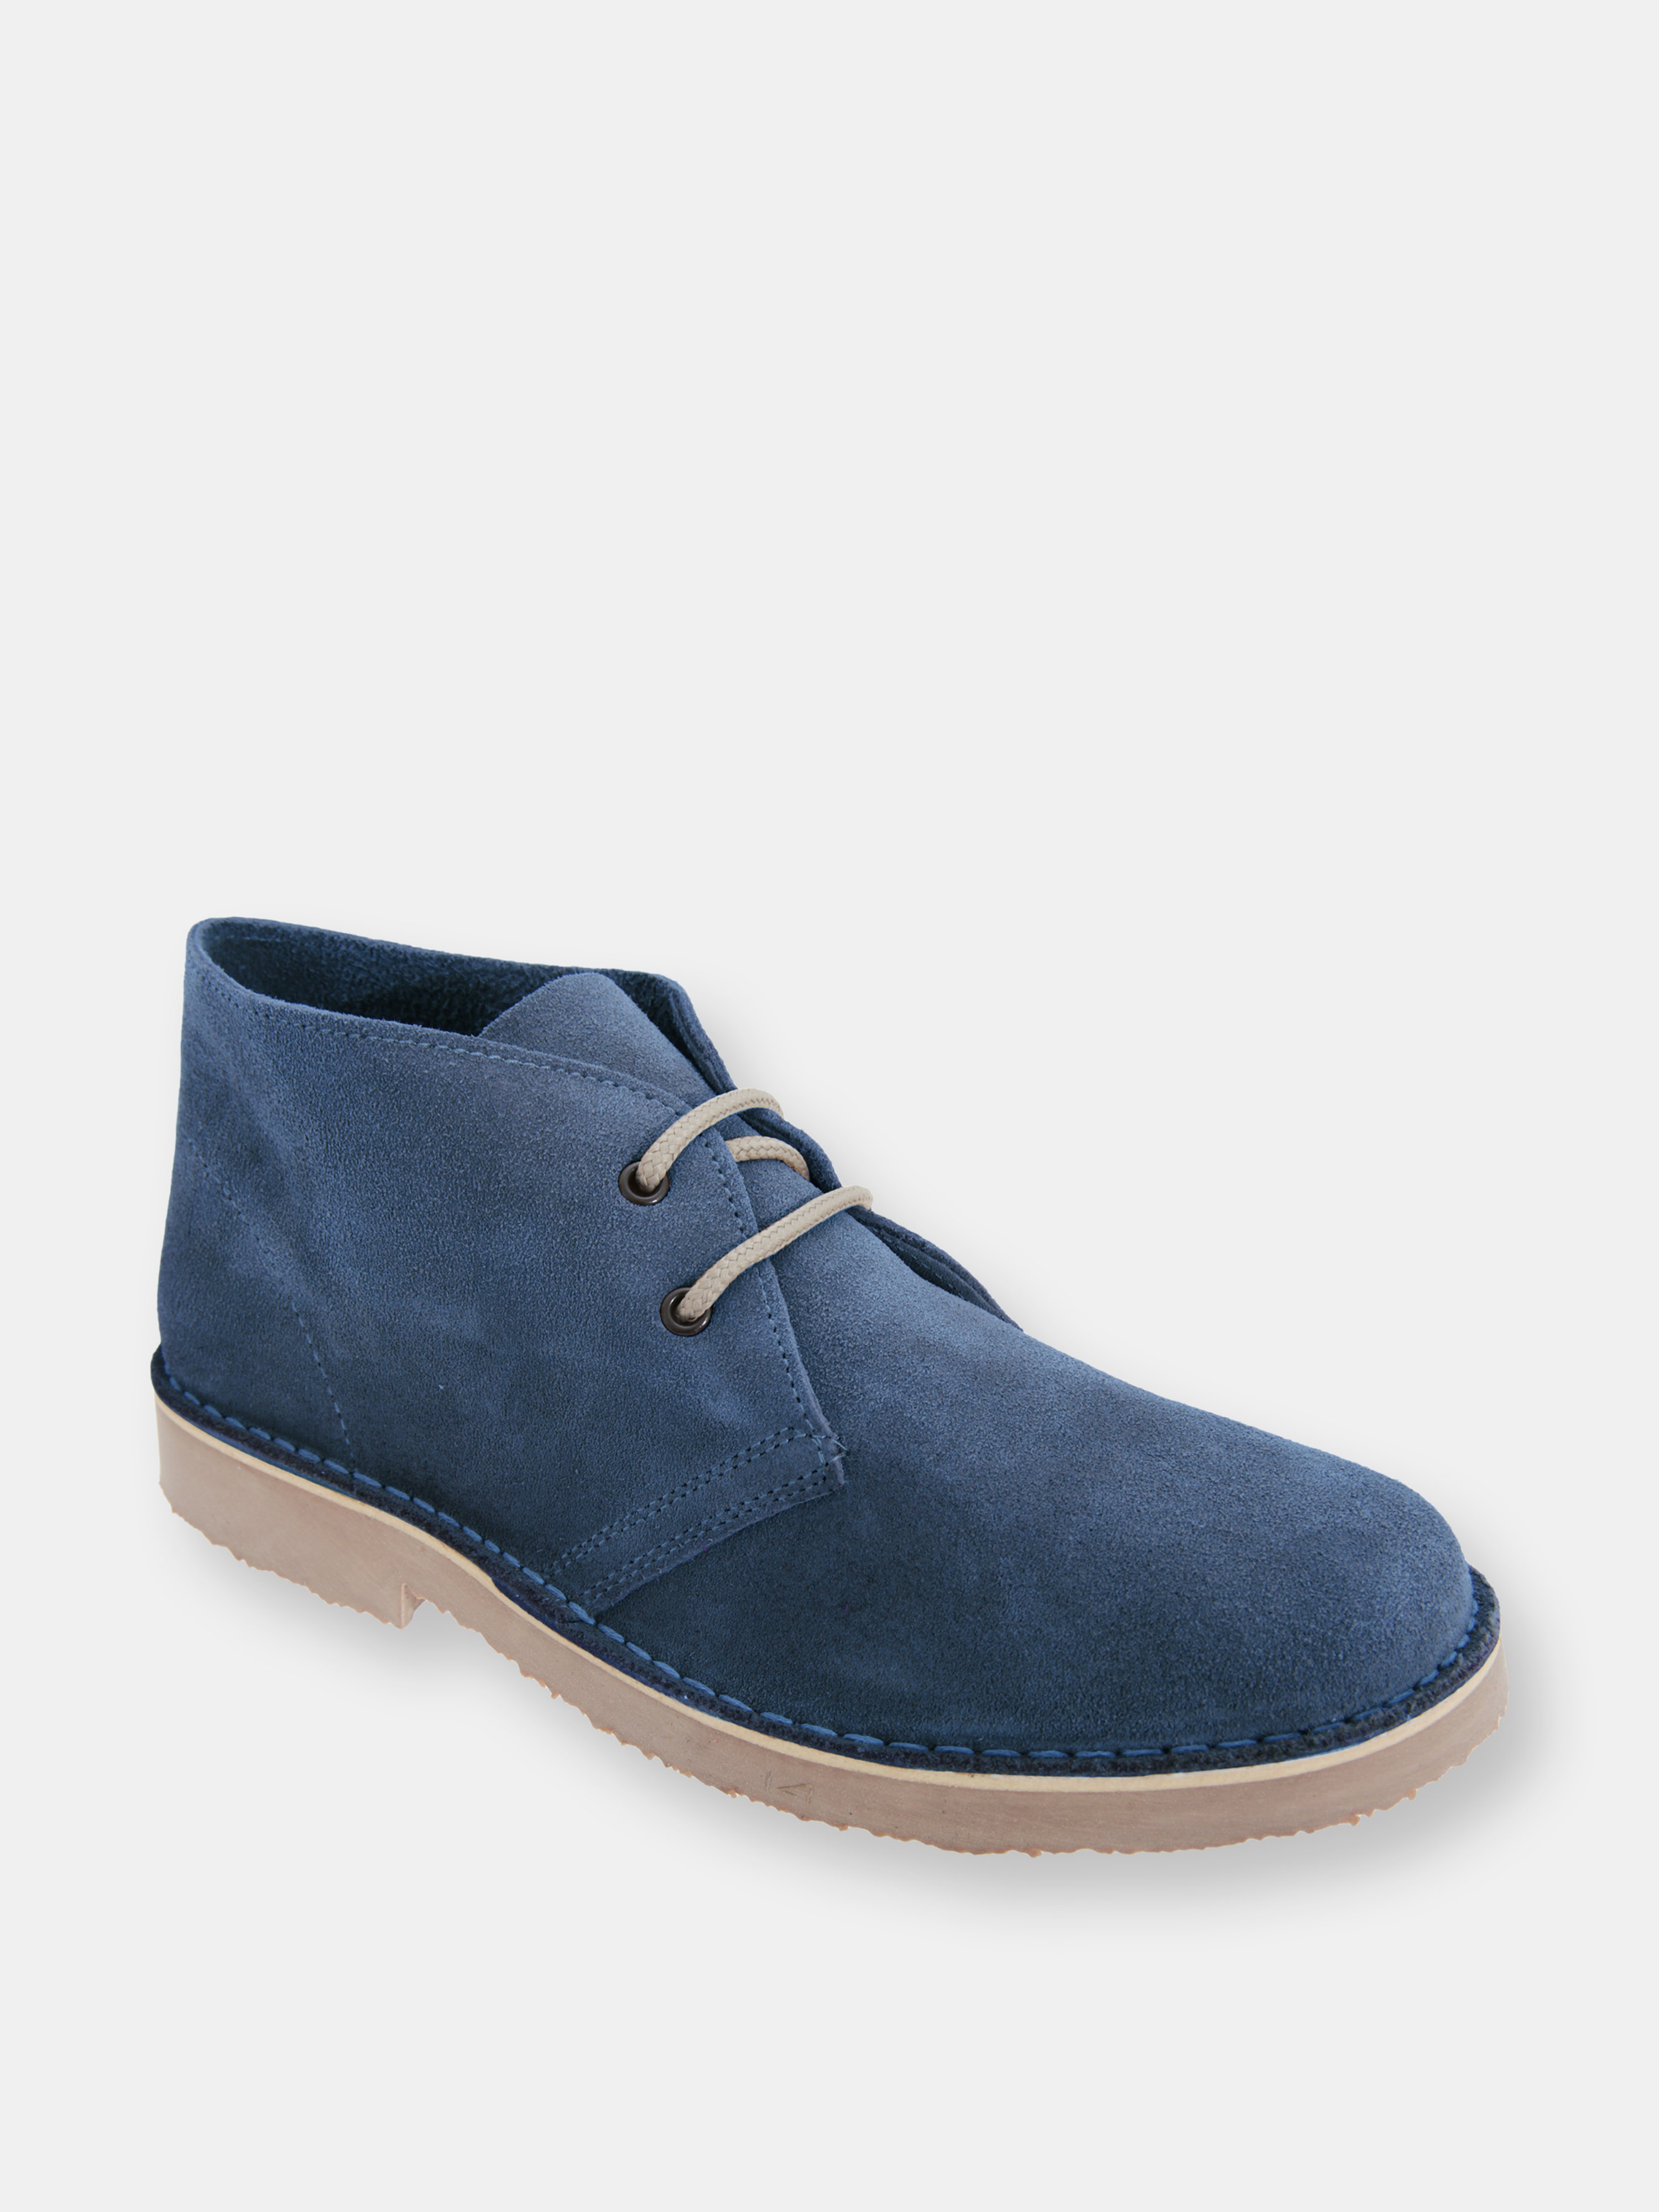 ROAMERS ROAMERS MENS REAL SUEDE ROUND TOE UNLINED DESERT BOOTS (NAVY)